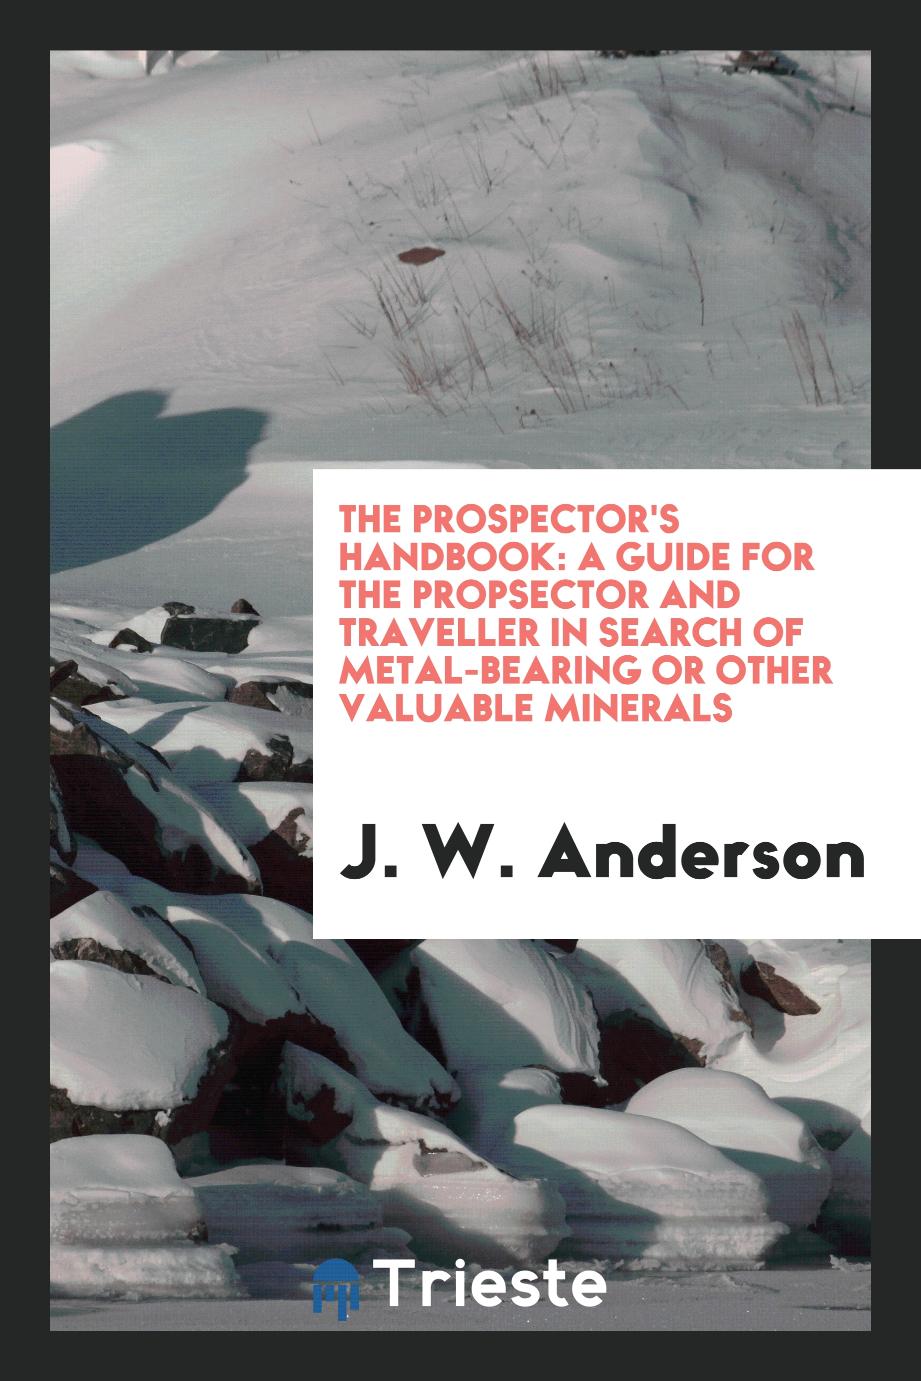 The prospector's handbook: a guide for the propsector and traveller in search of metal-bearing or other valuable minerals